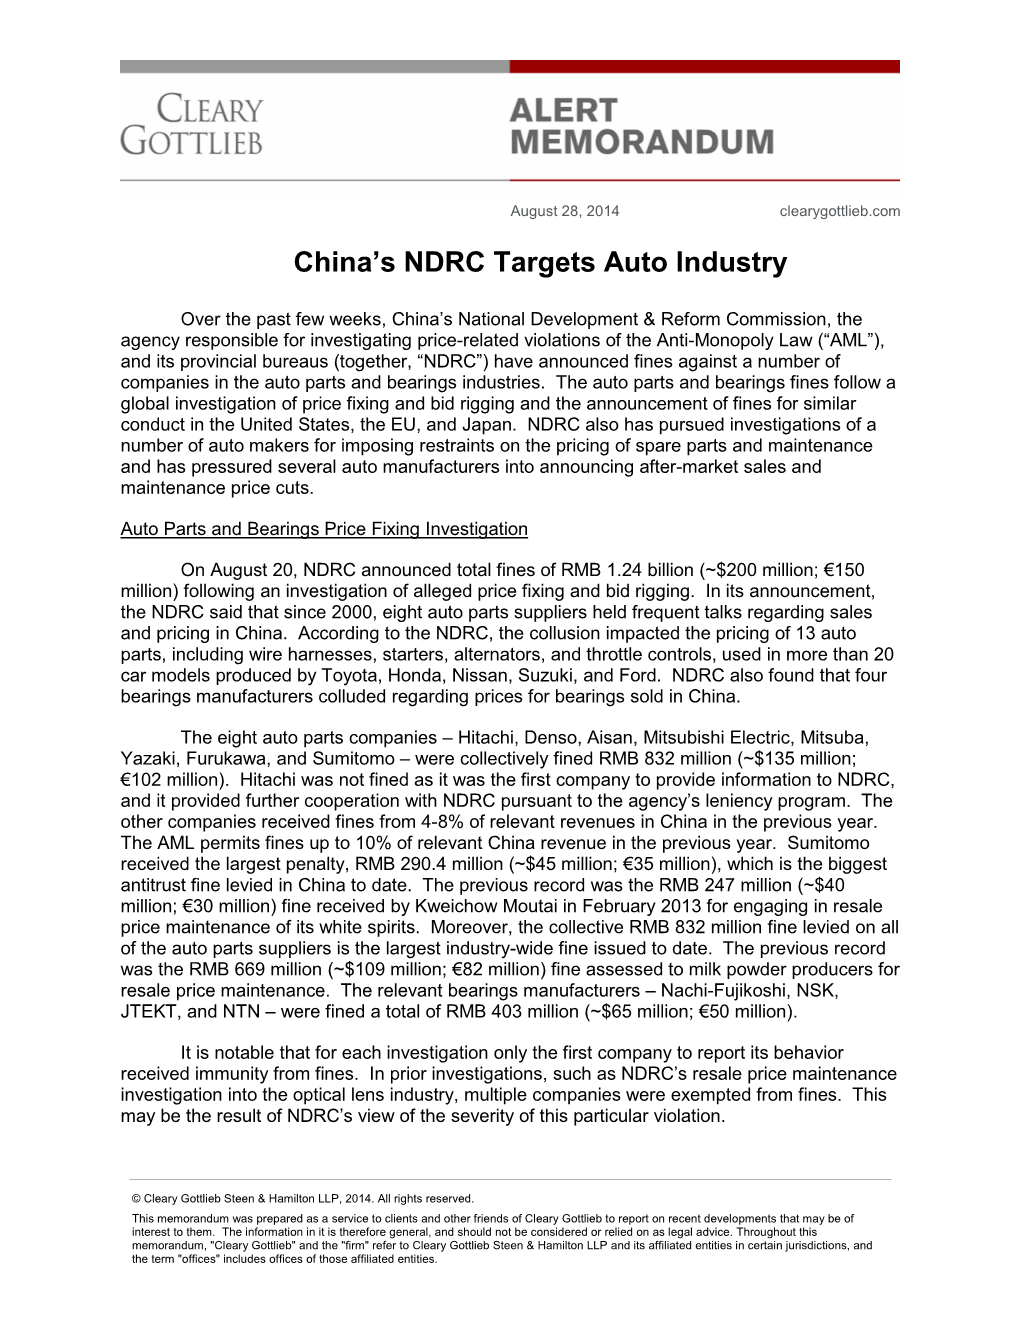 China's NDRC Targets Auto Industry